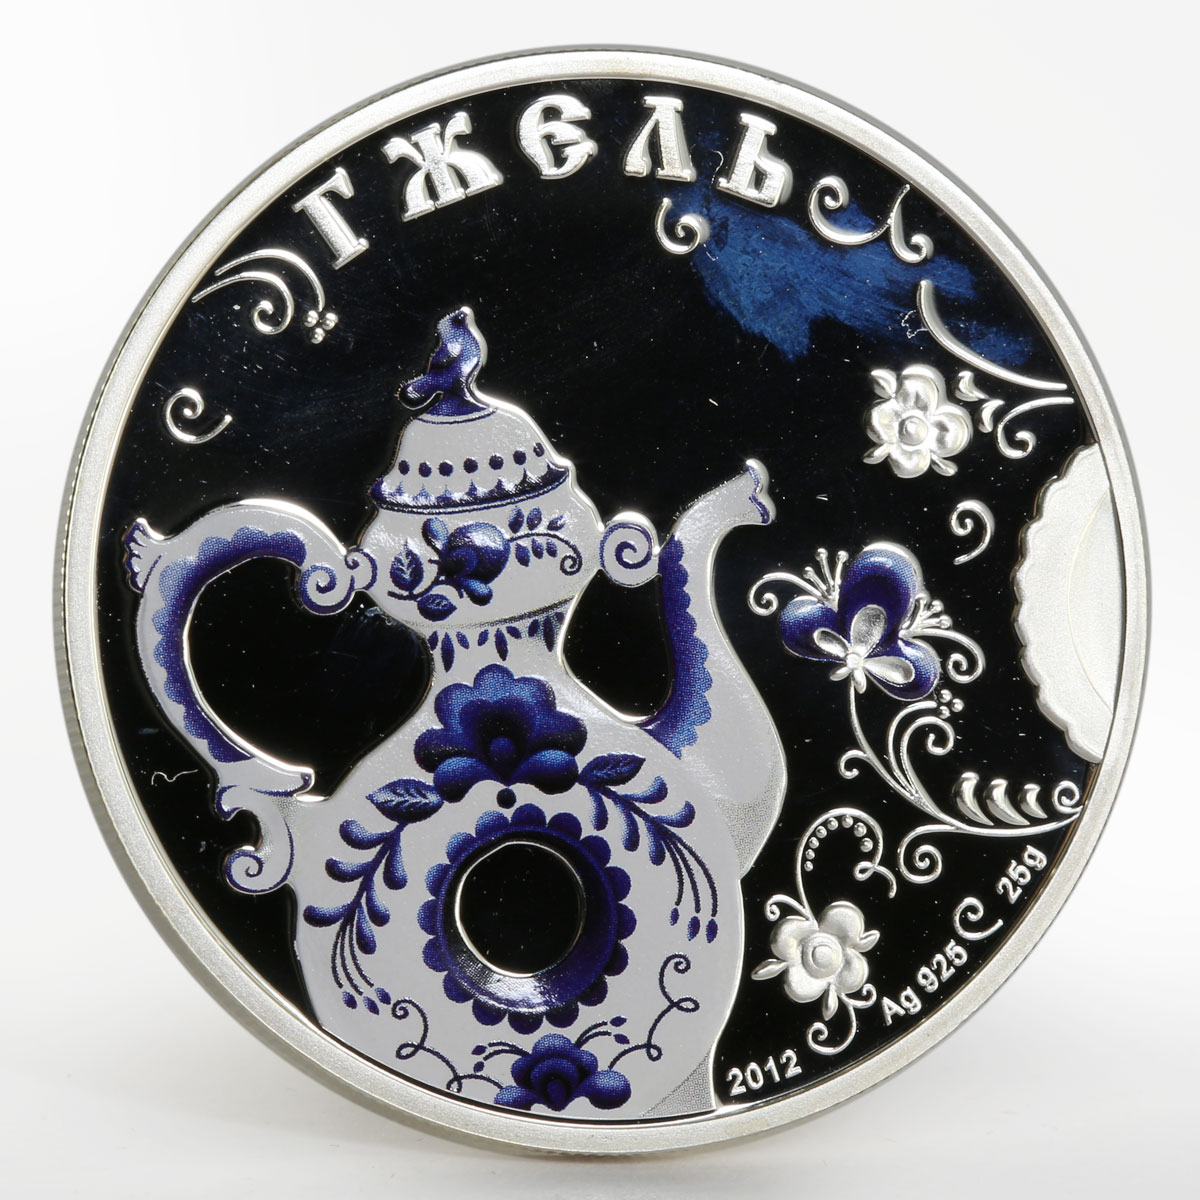 Cook Islands 5 dollars Russian Folk Crafts series Gzhel colored silver coin 2012